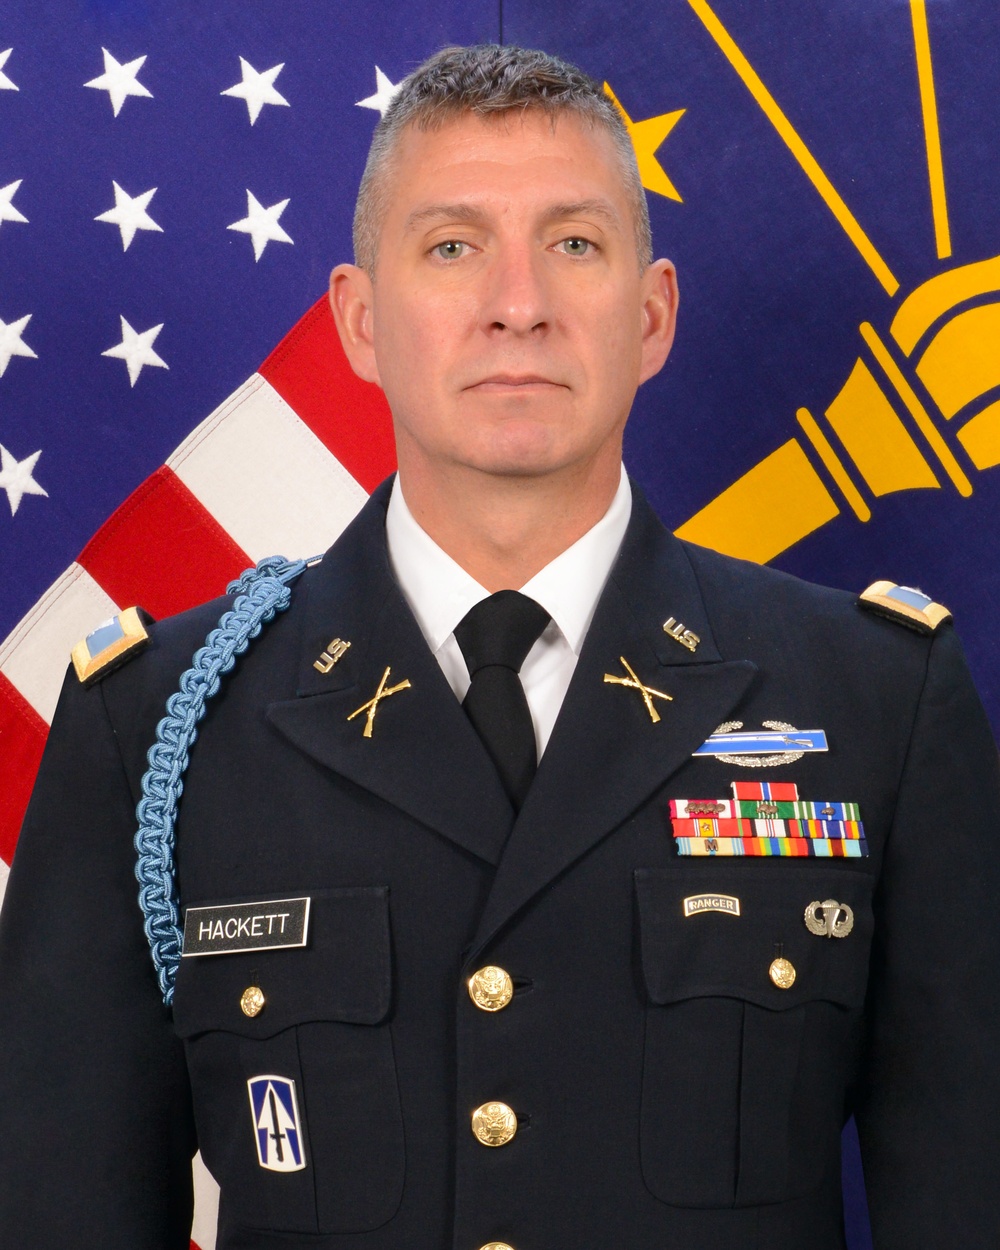 Indiana’s new assistance brigade gets first commander